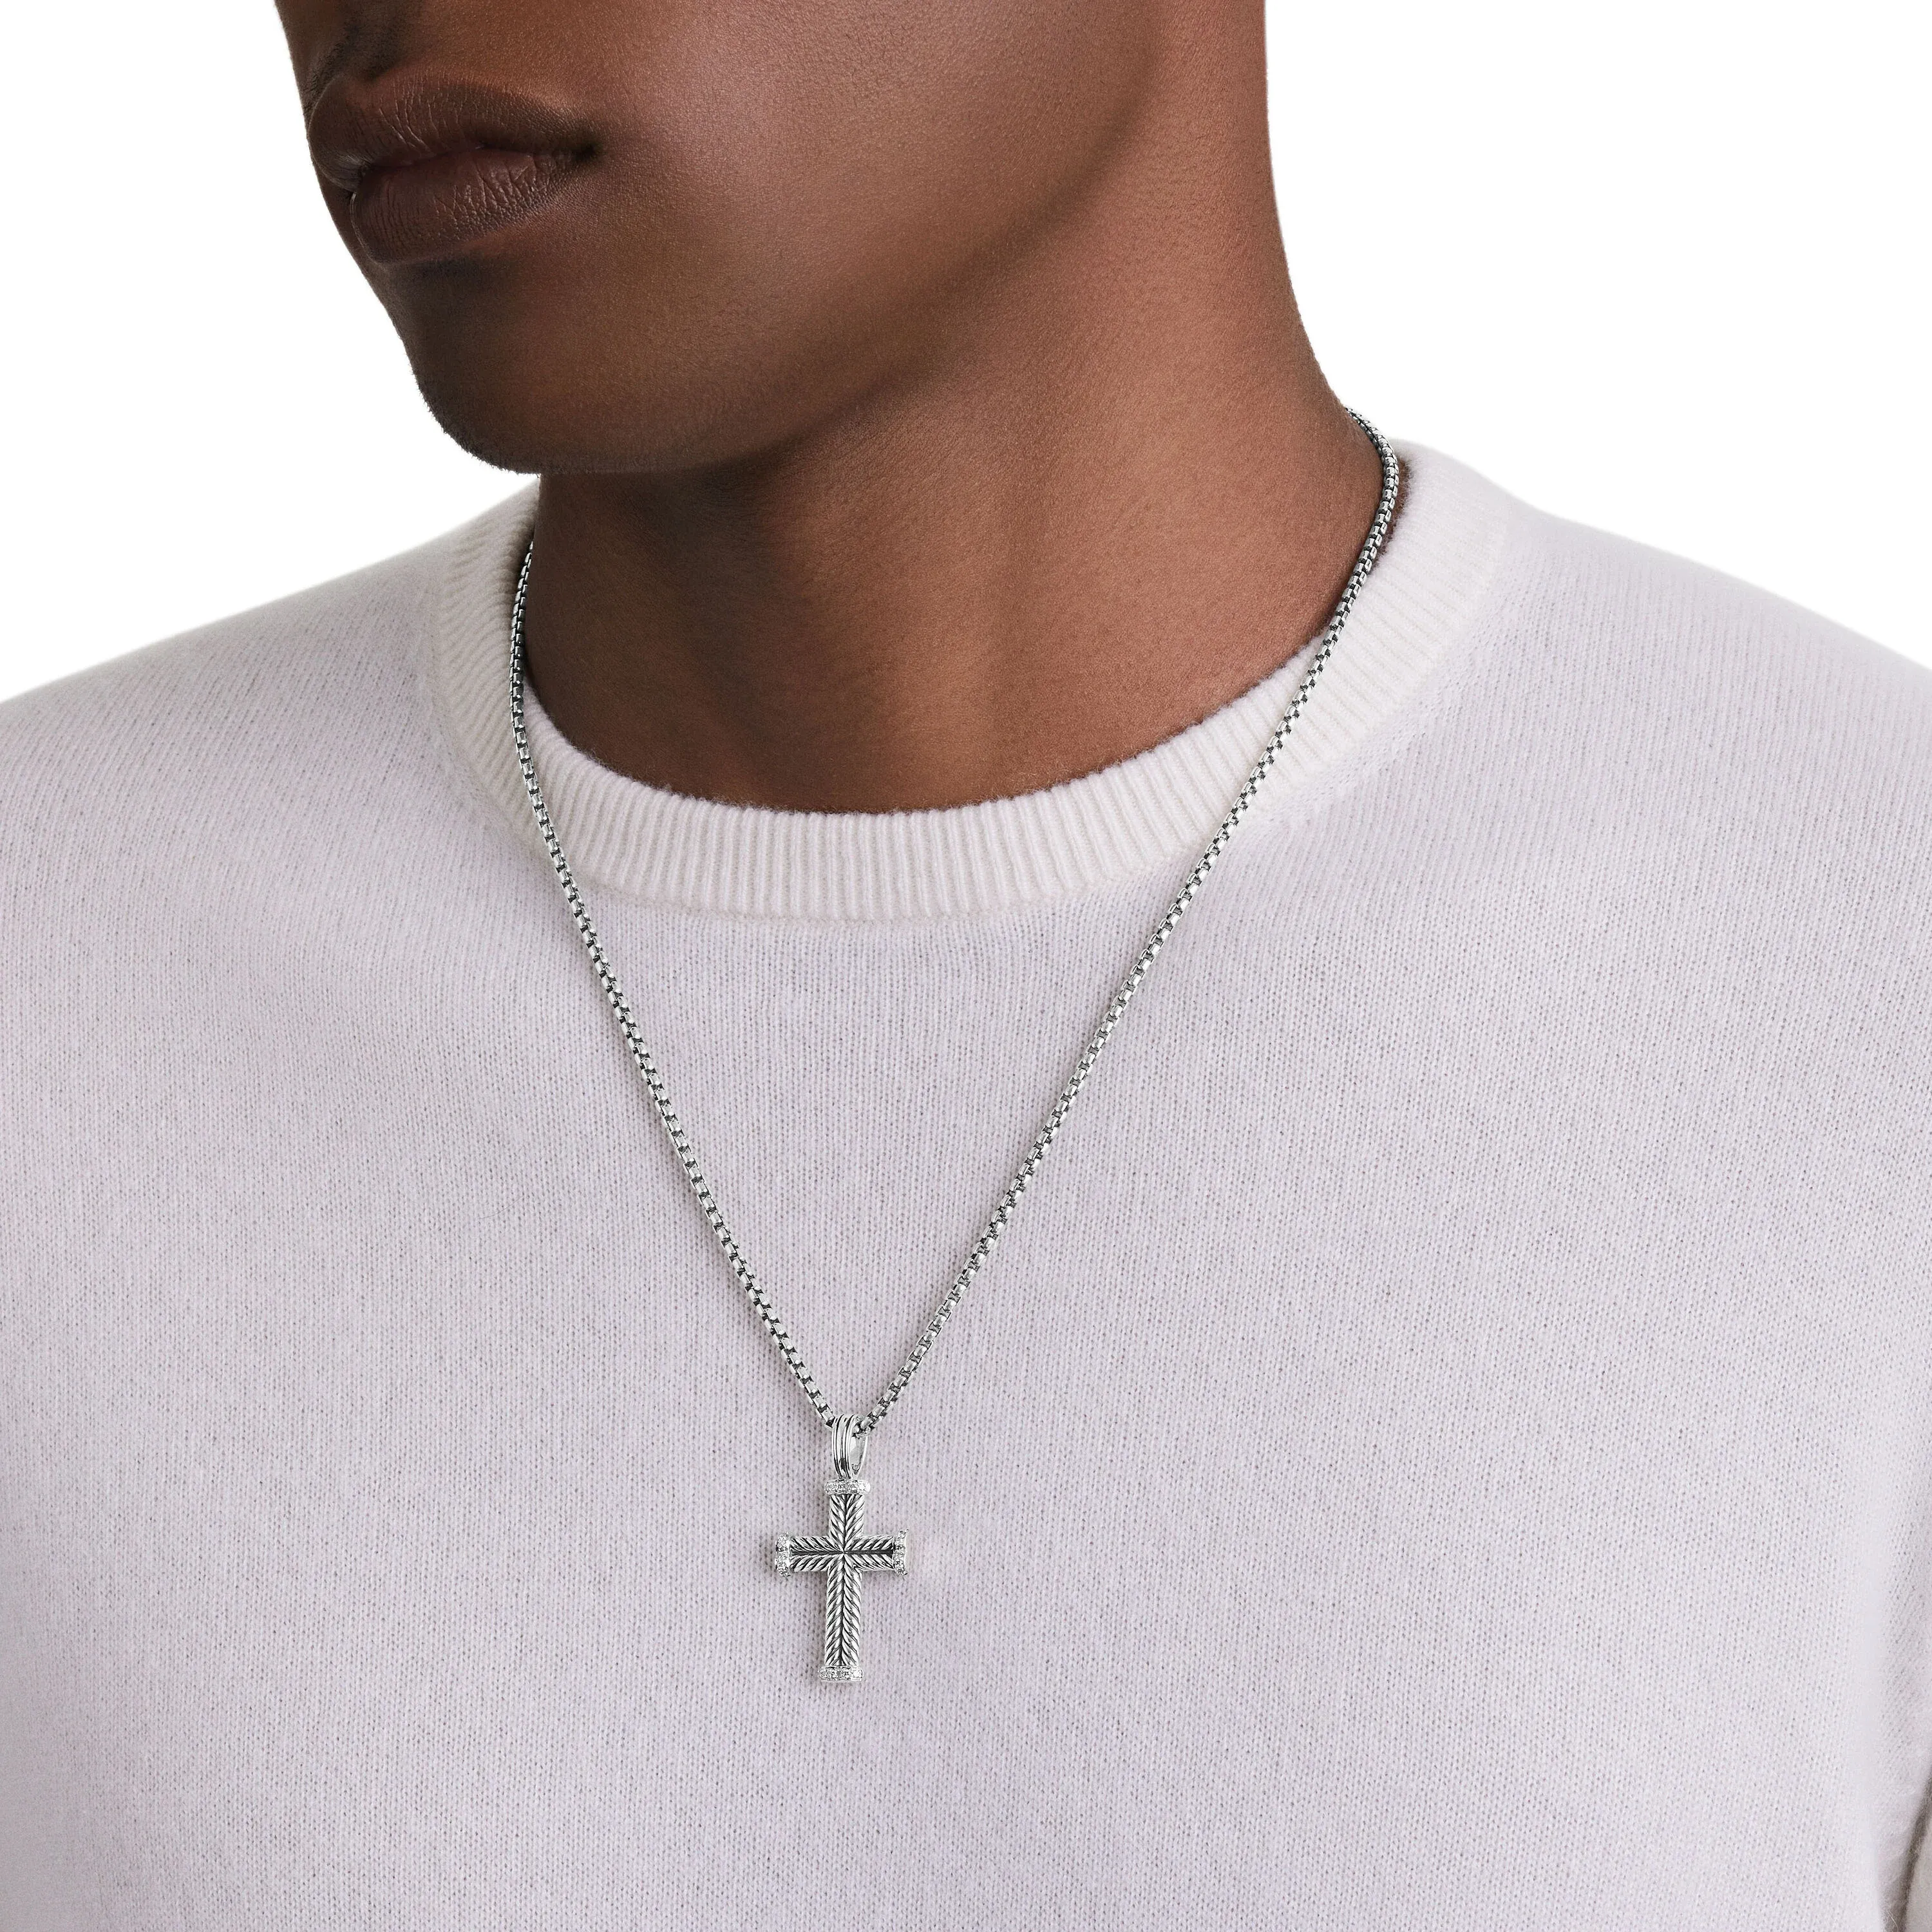 High Quality Luxury Deluxe CROSS Pendant Necklace for Women for Men DY Cable Classic Buckle Bracelet Gold 925 Sterling Silver 